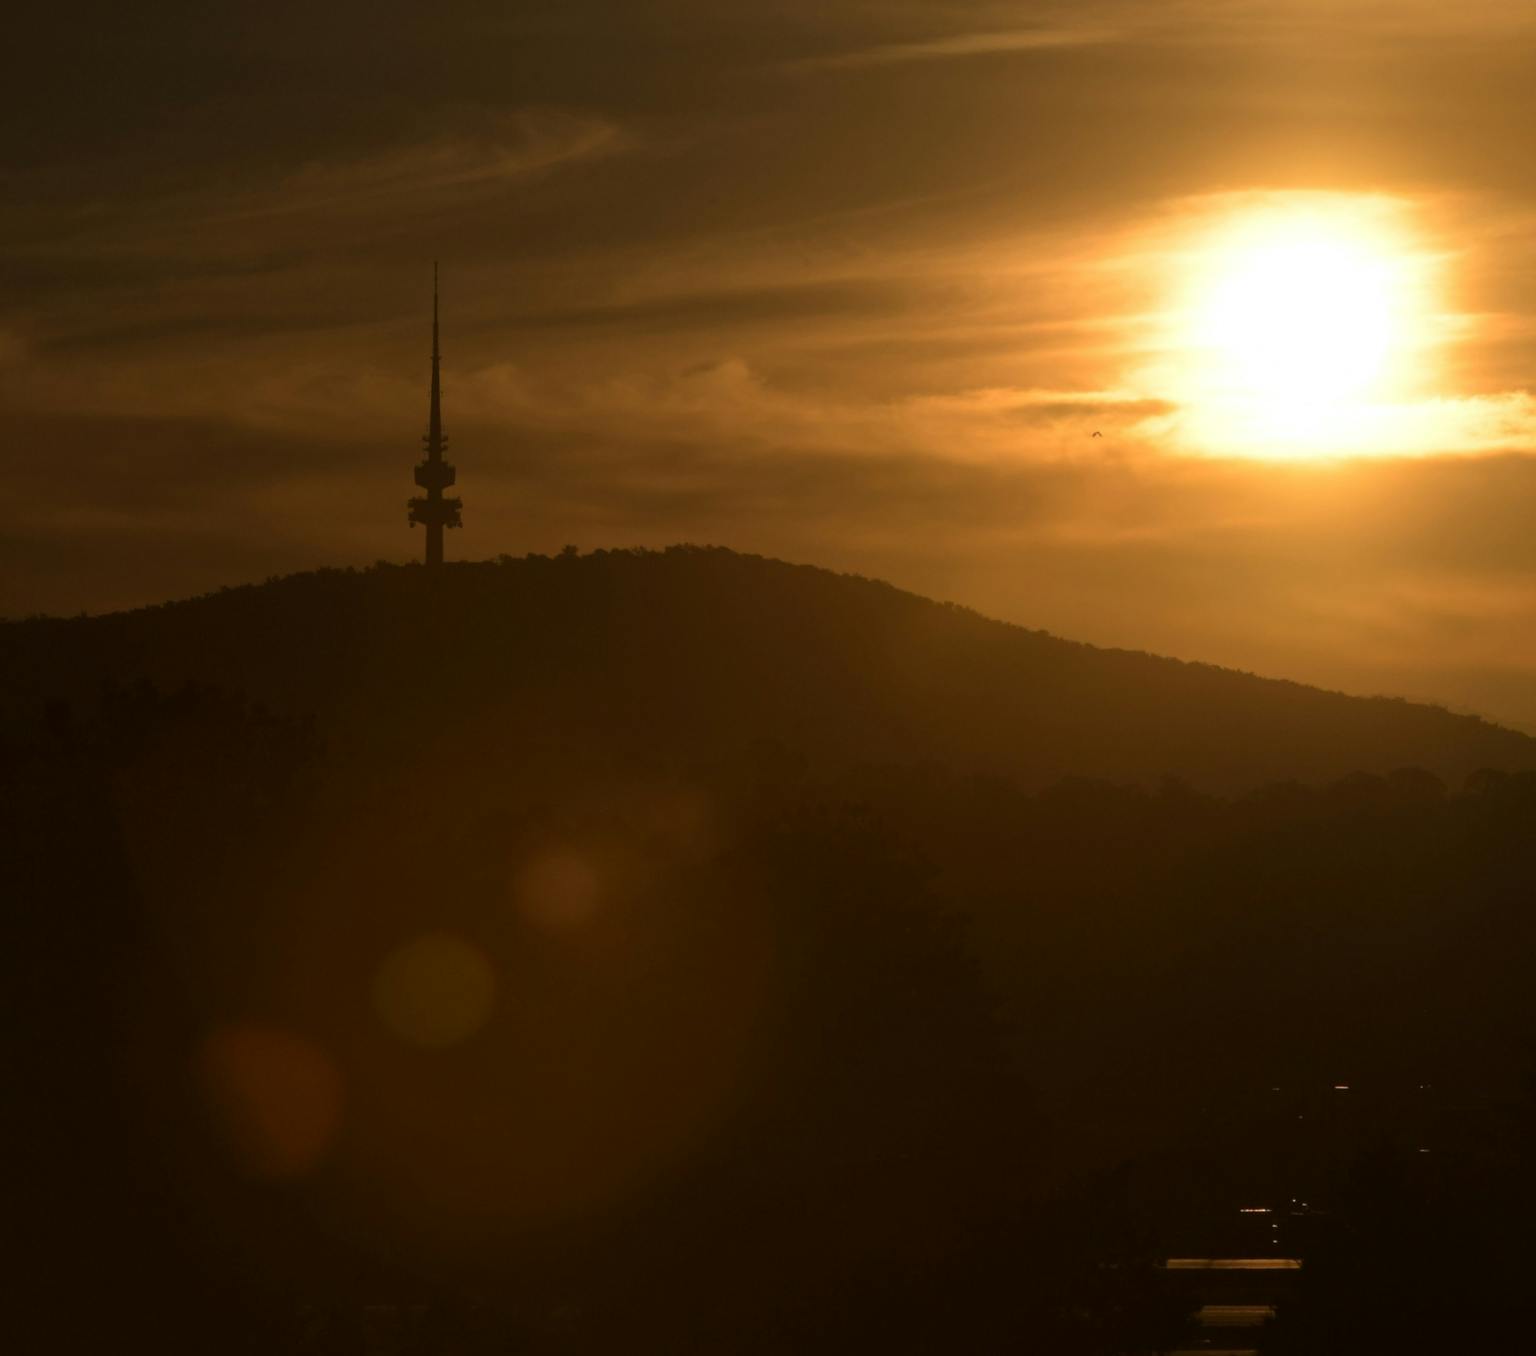 Orange sky with a bright sun in the top right corner illuminates a mountain with a telecommunications tower on its peak